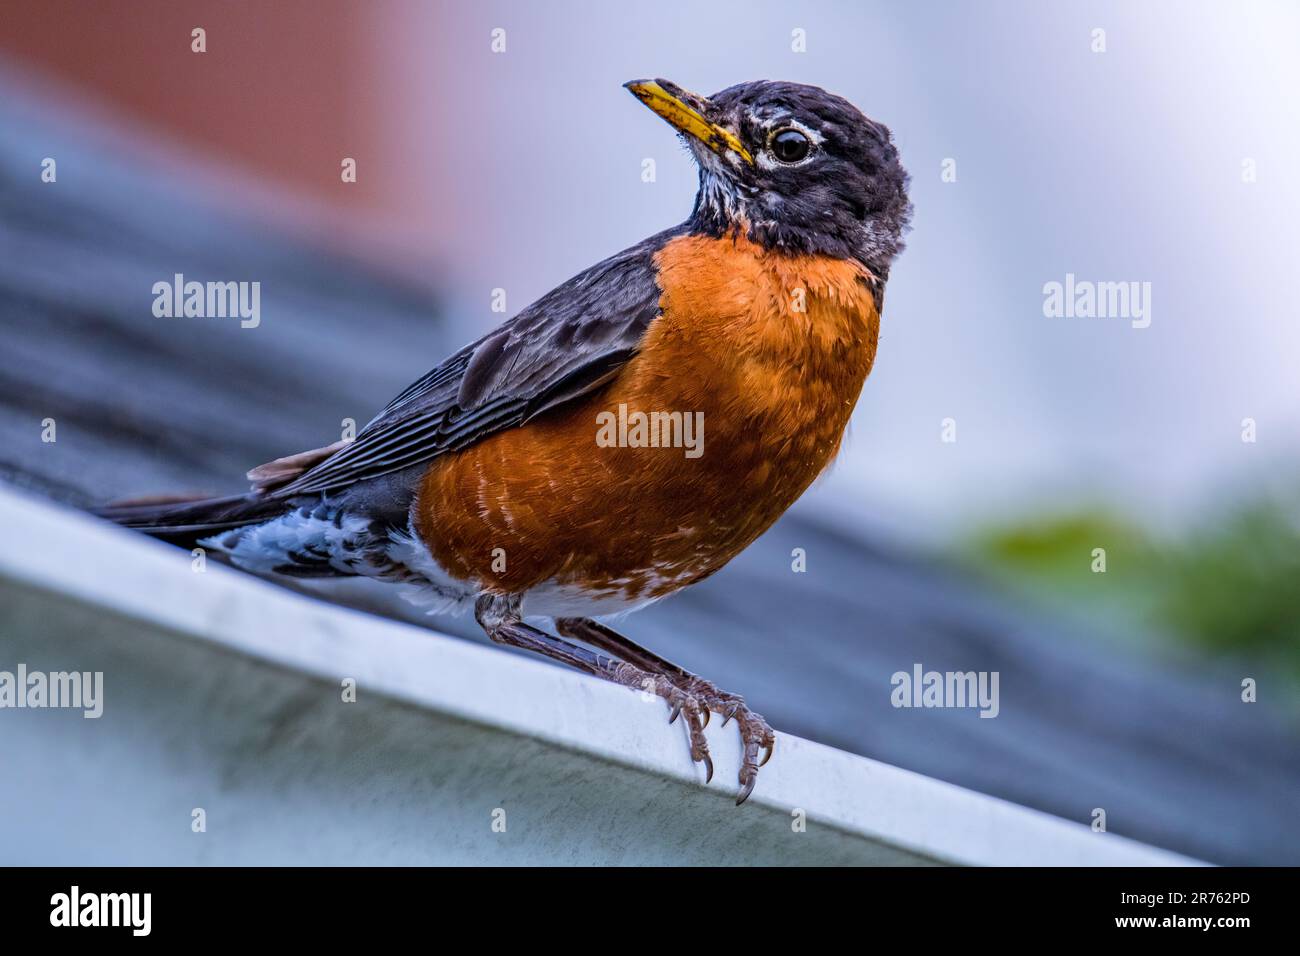 An American Robin perched on the ridge of a rooftop surveys its nest, looking alertly for any potential threats Stock Photo